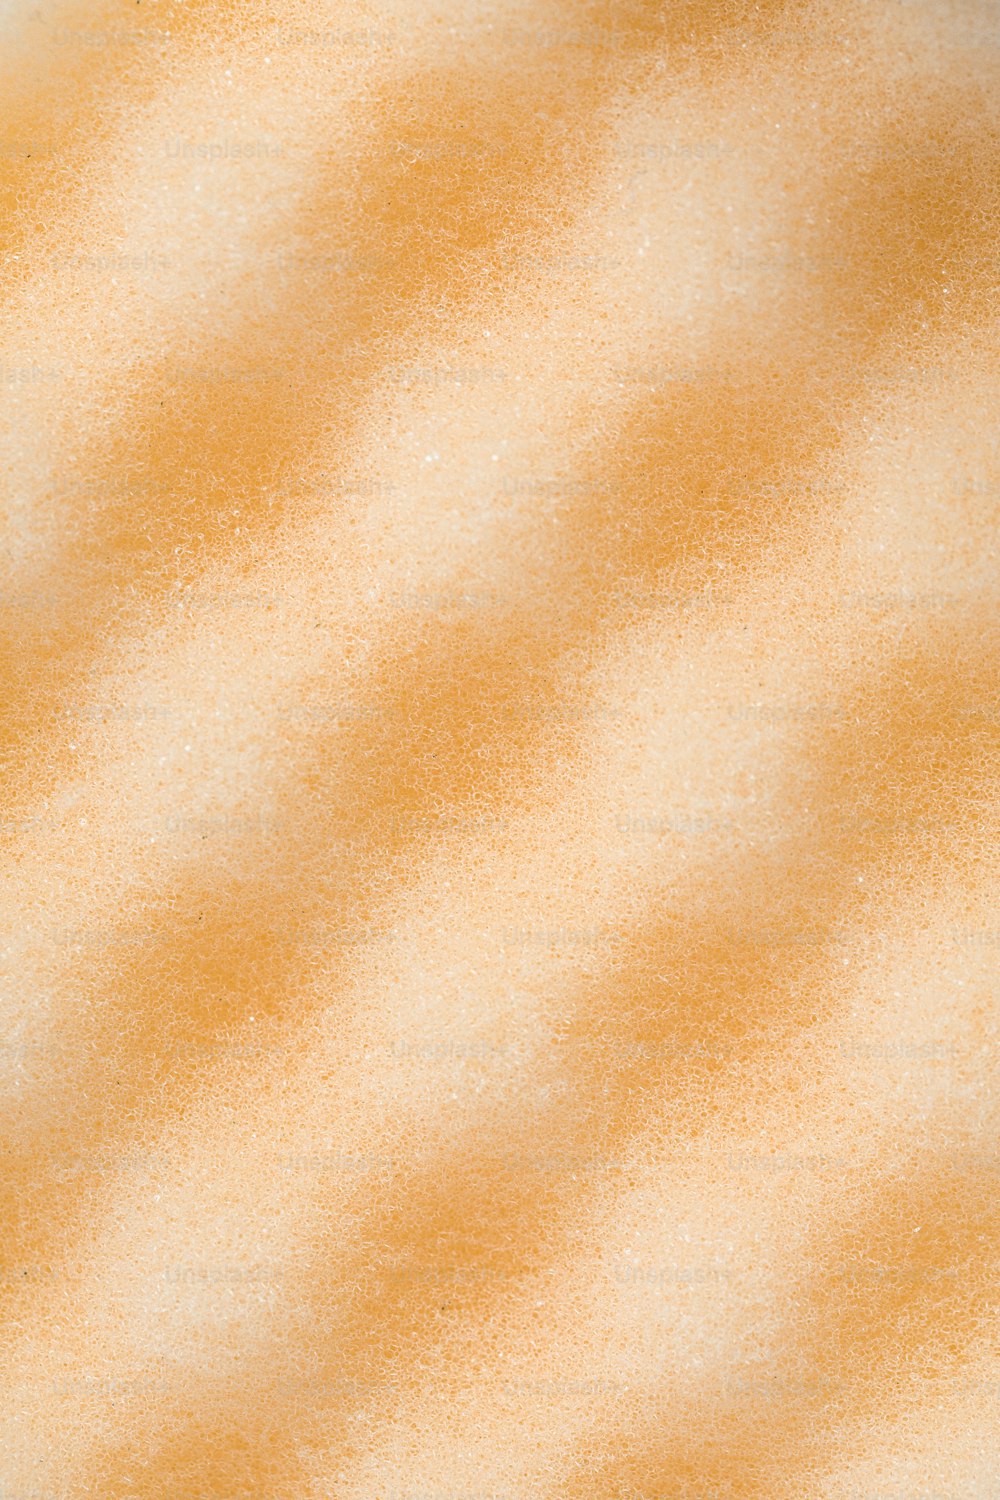 a close up of an orange and white background